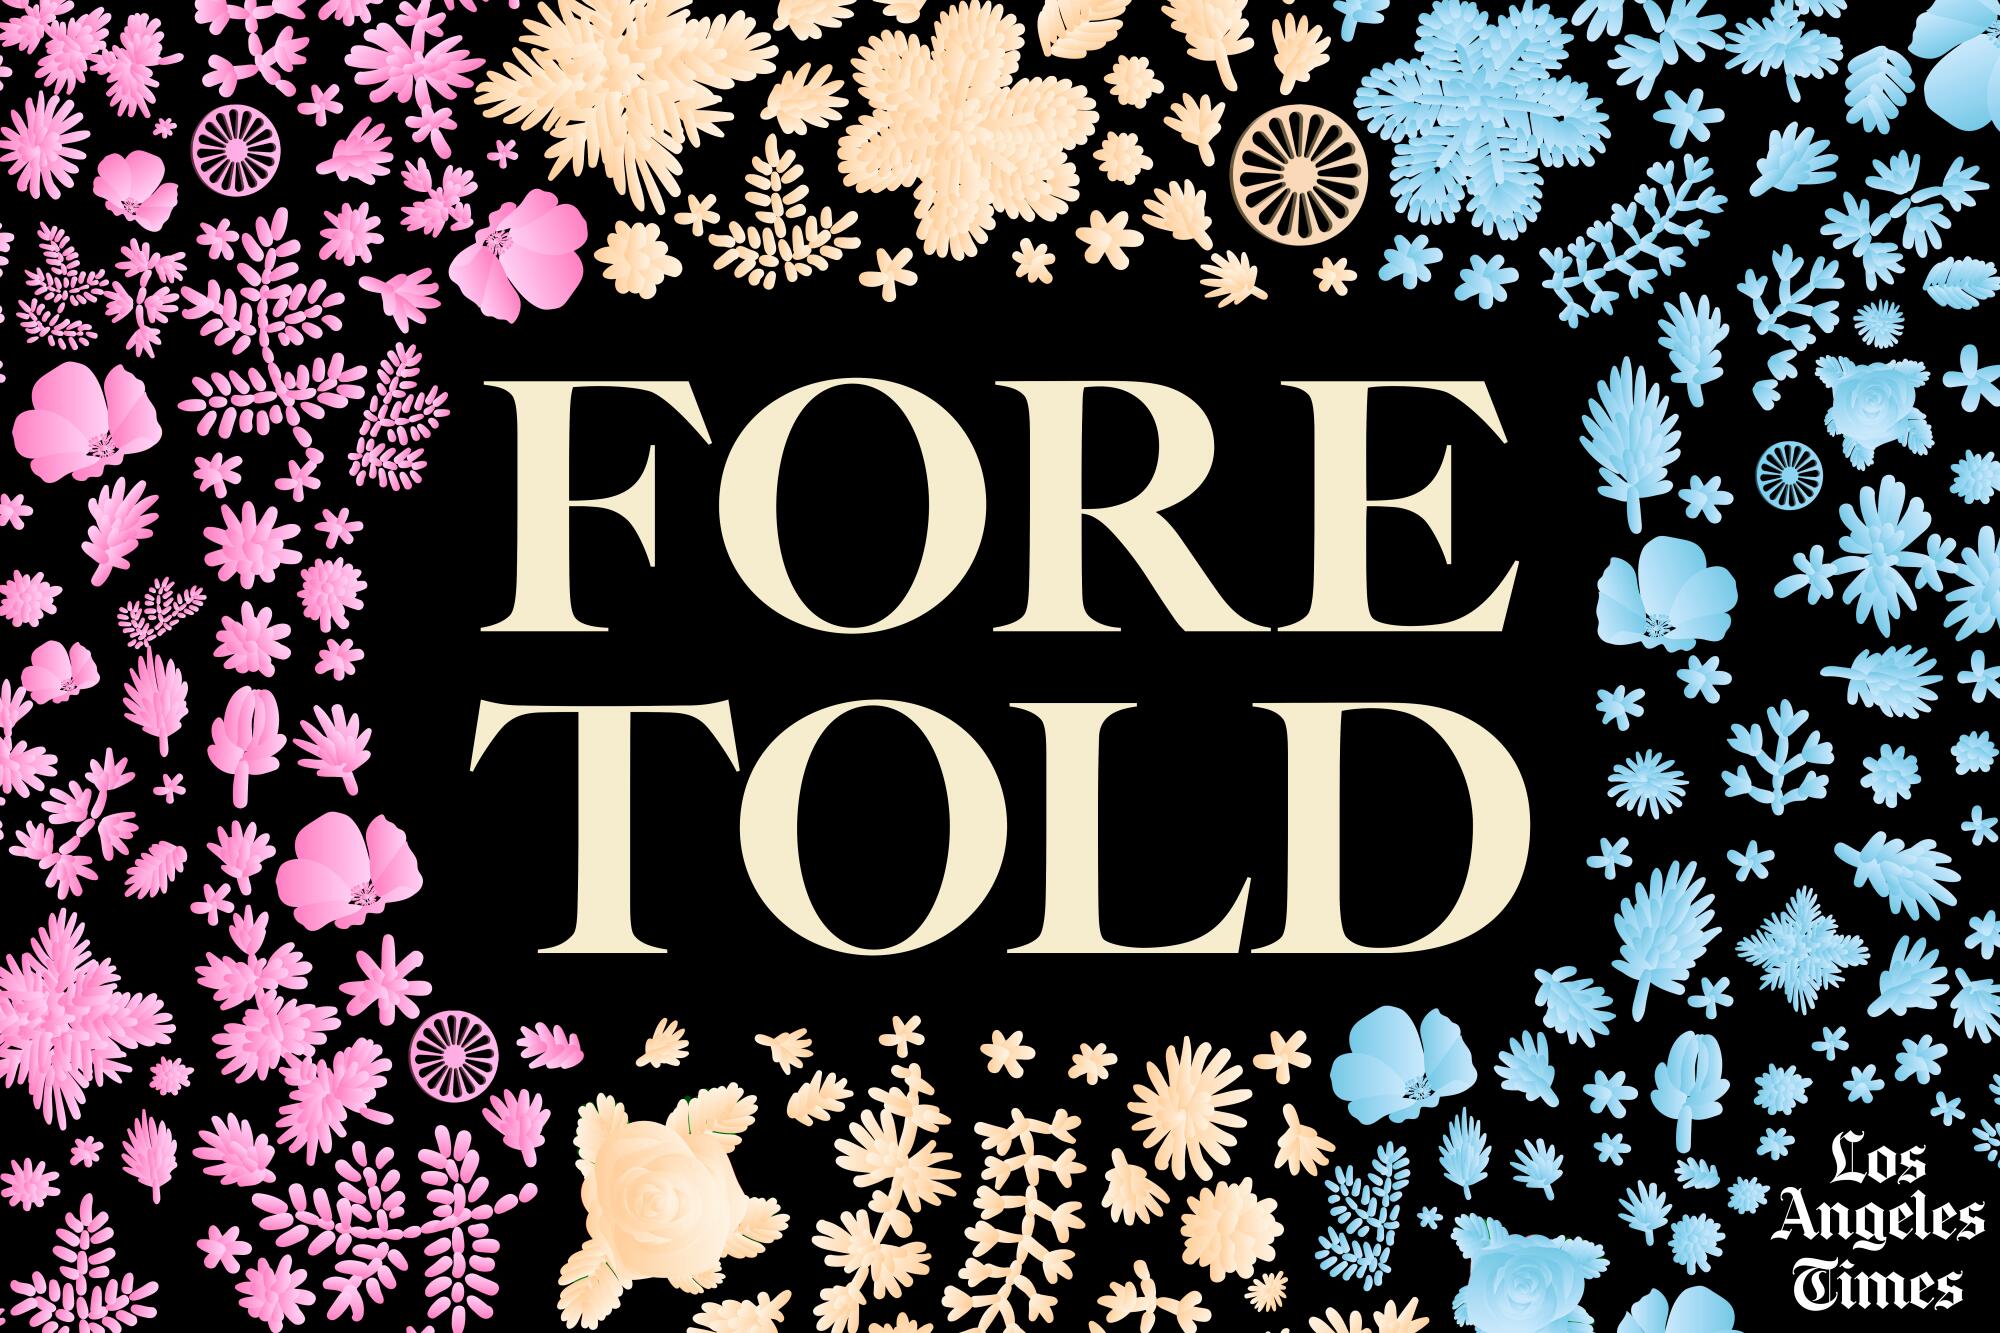 The "Foretold" logo surrounded by flowers and Romani wheels in pastel colors.